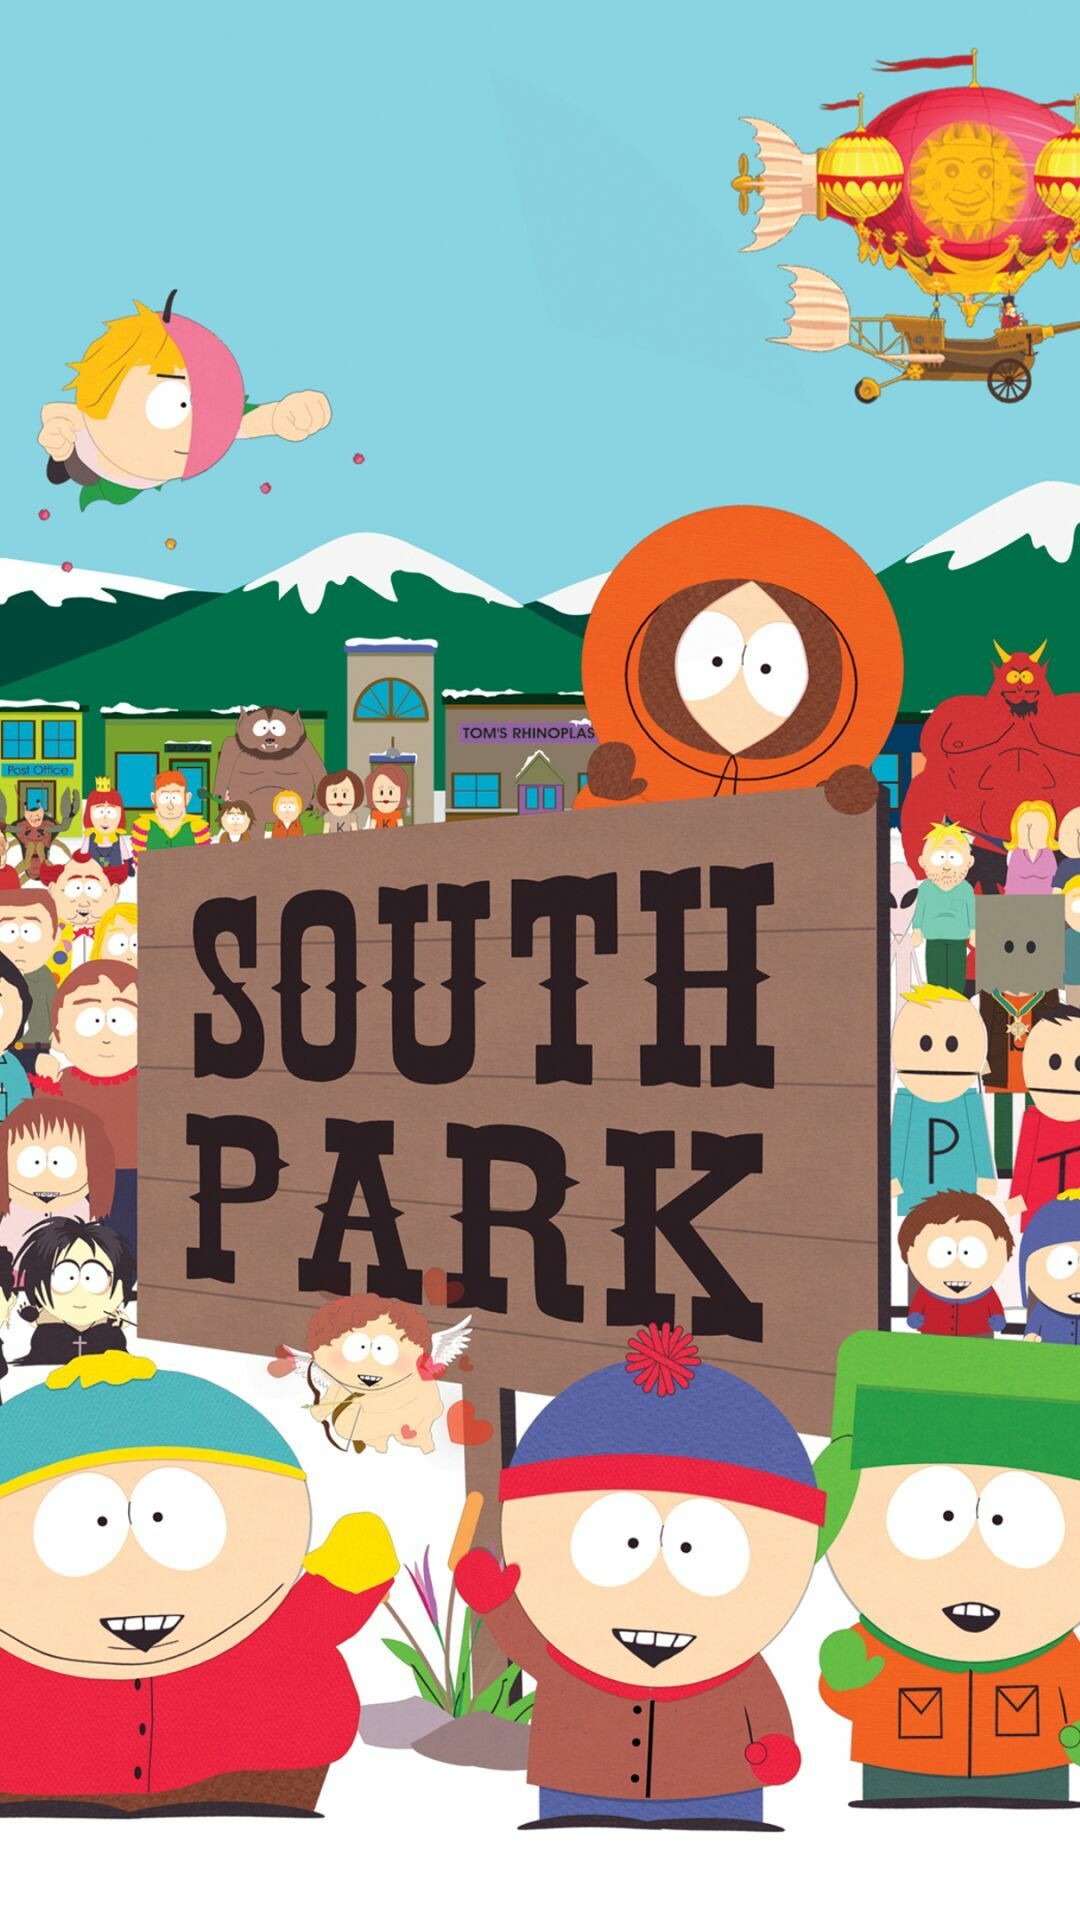 South Park: Animation is inspired by the paper cut-out cartoons in Monty Python's Flying Circus. 1080x1920 Full HD Background.